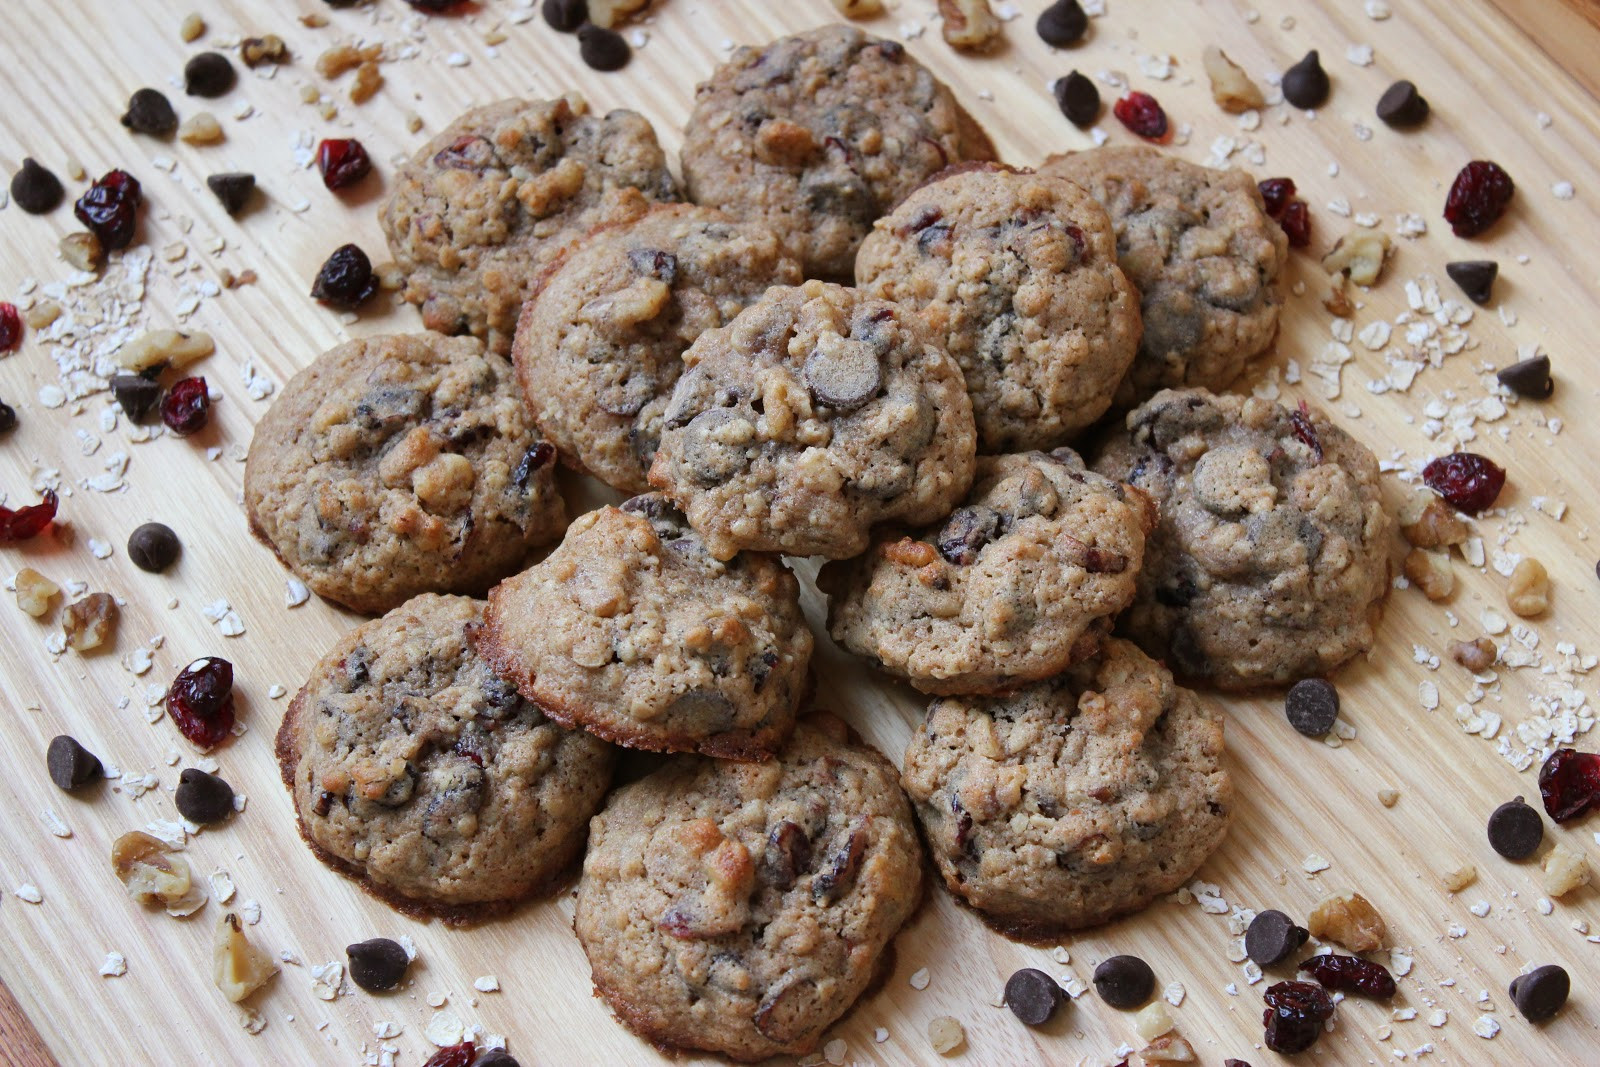 Healthy Whole Wheat Chocolate Chip Cookies
 Chelsea s Choice Healthy Whole Wheat Dark Chocolate Chip